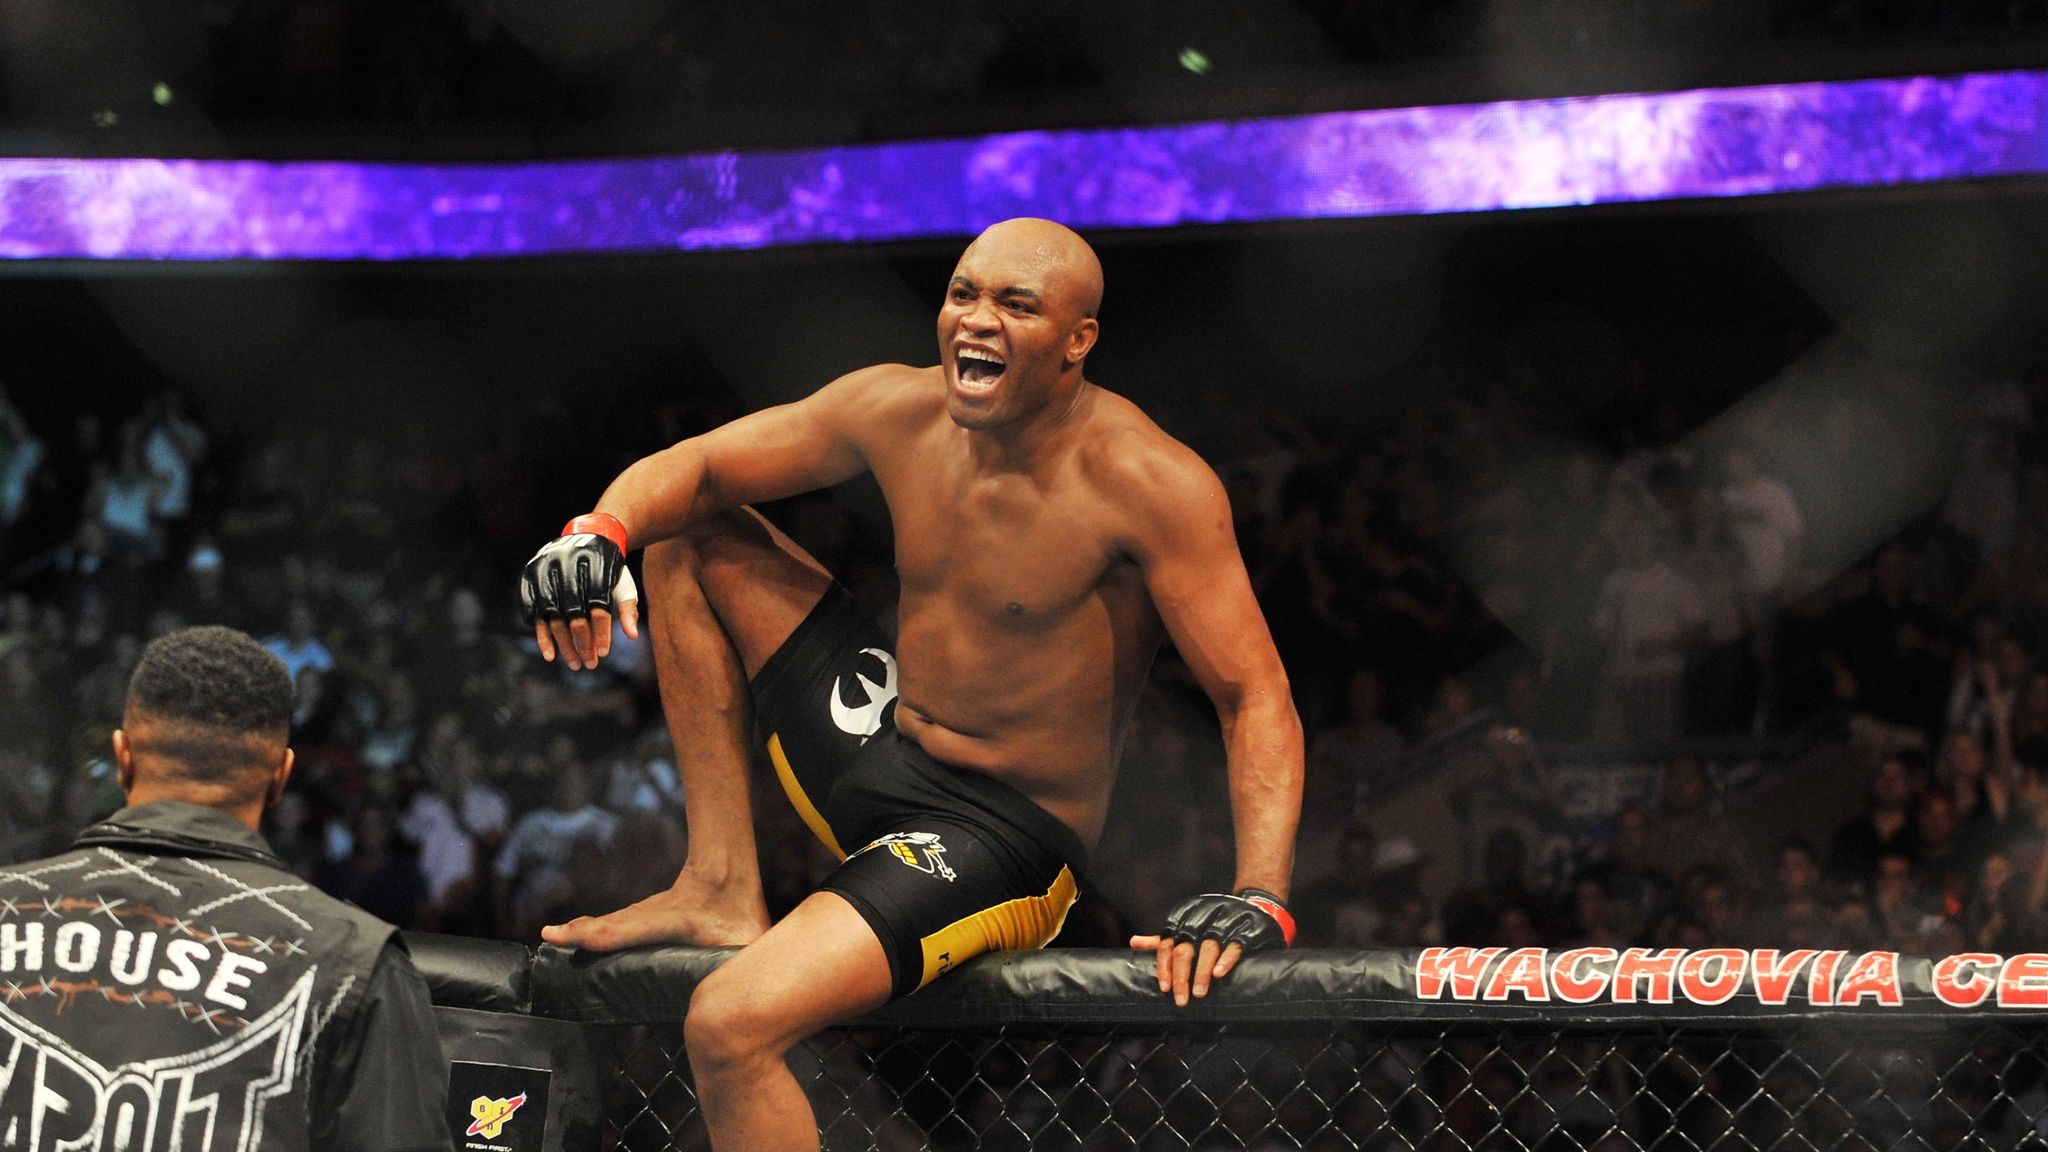 UFC legend Anderson Silva has history in London ahead of Michael